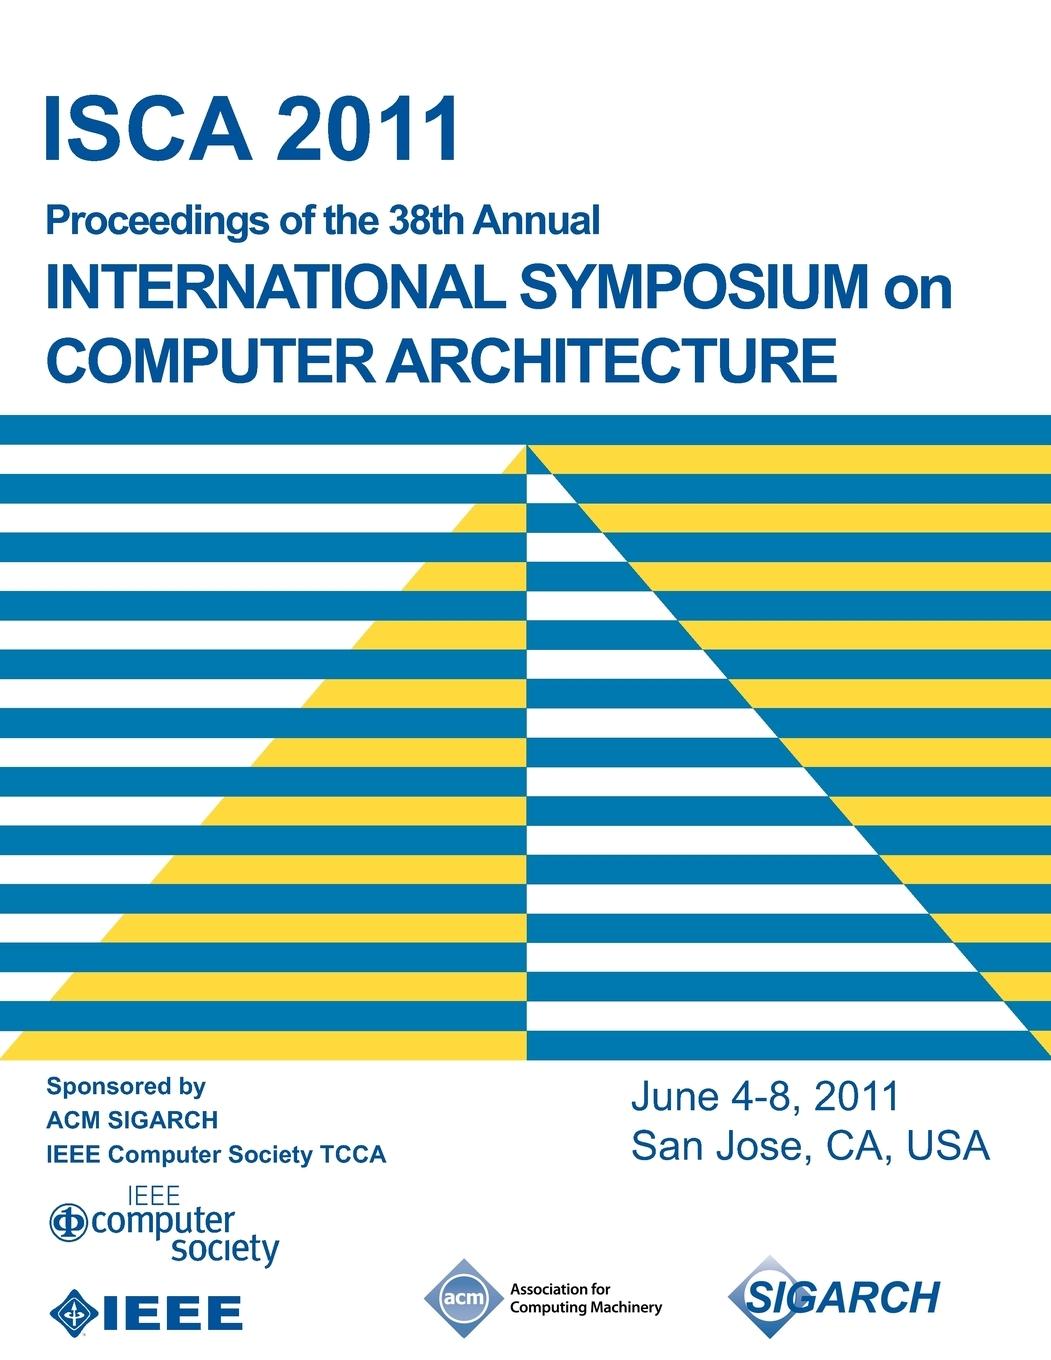 ISCA 2011 Proceedings of the 38th Annual International Symposium on Computer Architecture - Isca 2011 Conference Committee